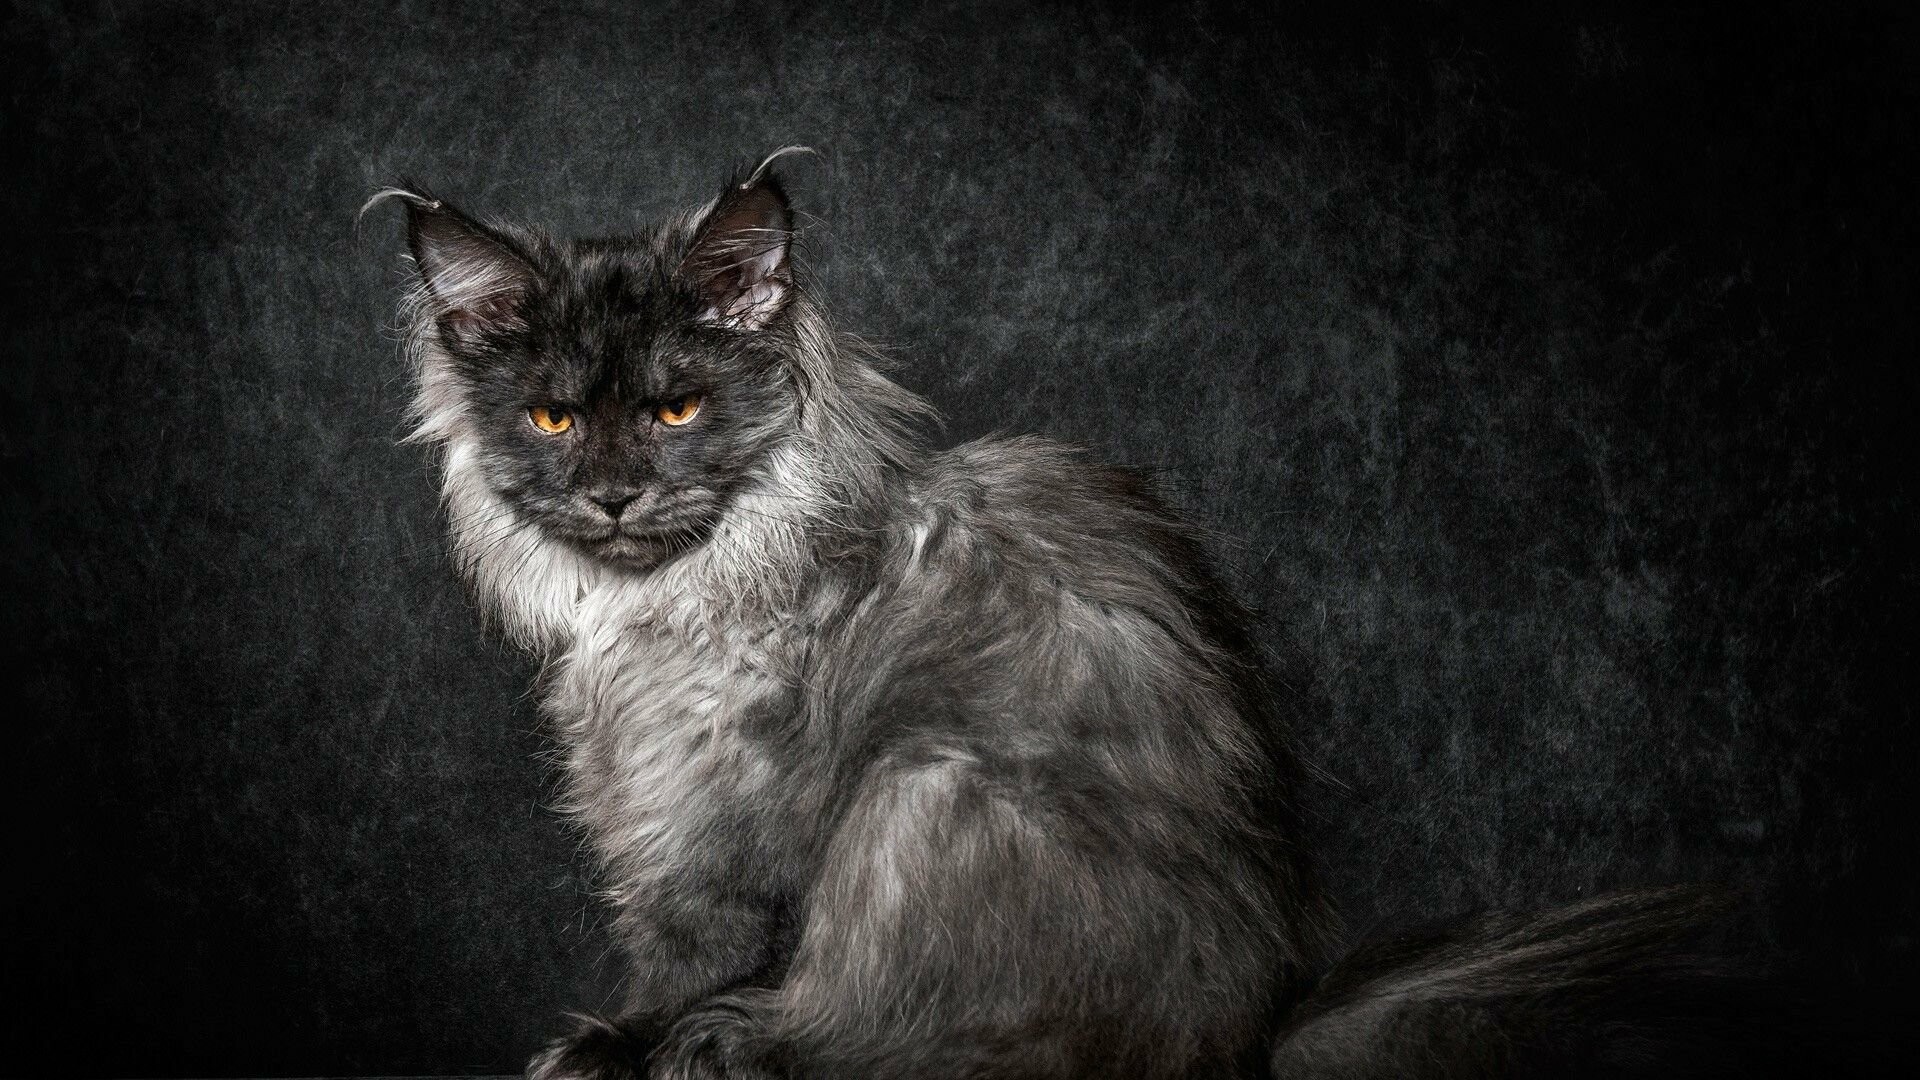 Maine Coon: A large, intelligent, affectionate pet who loves their people. 1920x1080 Full HD Background.